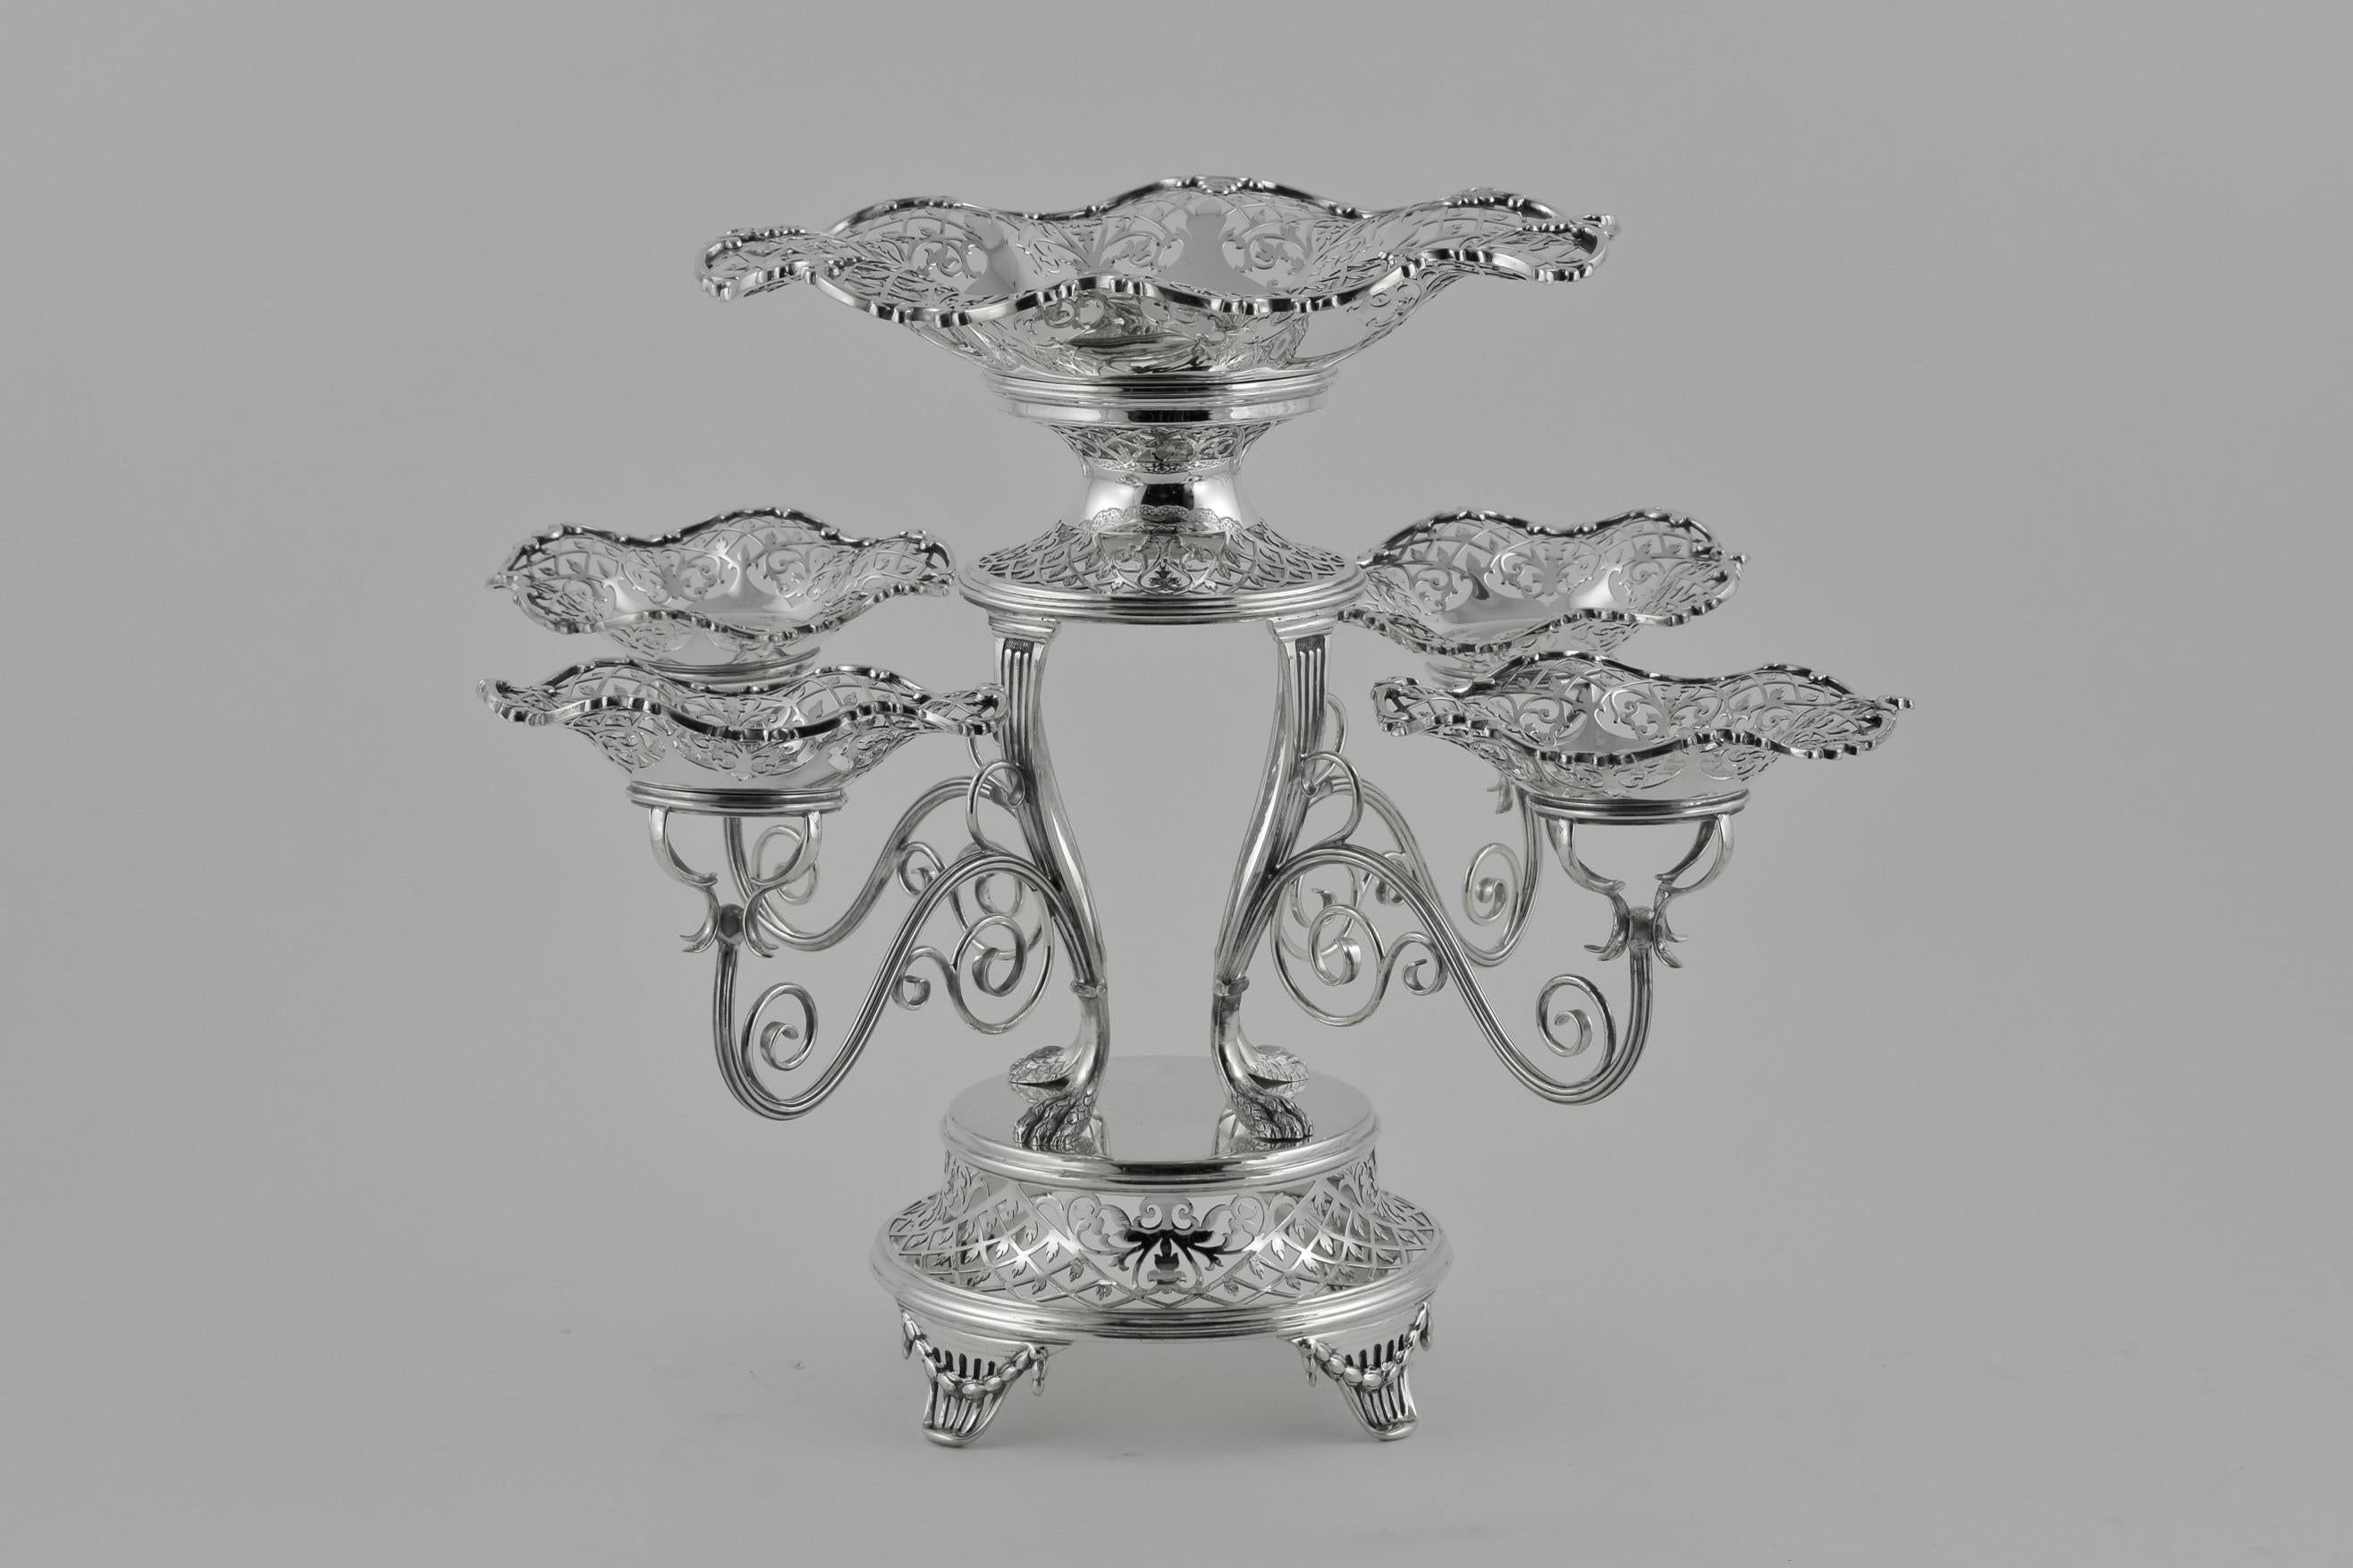 A 5 dish epergne by The Alexander Clark Company London. Formed with 5 removable pierced dishes, the circular foot raised on four feet, the frame and branches decorated throughout with elaborate pierced work and with scrolling branches.


The